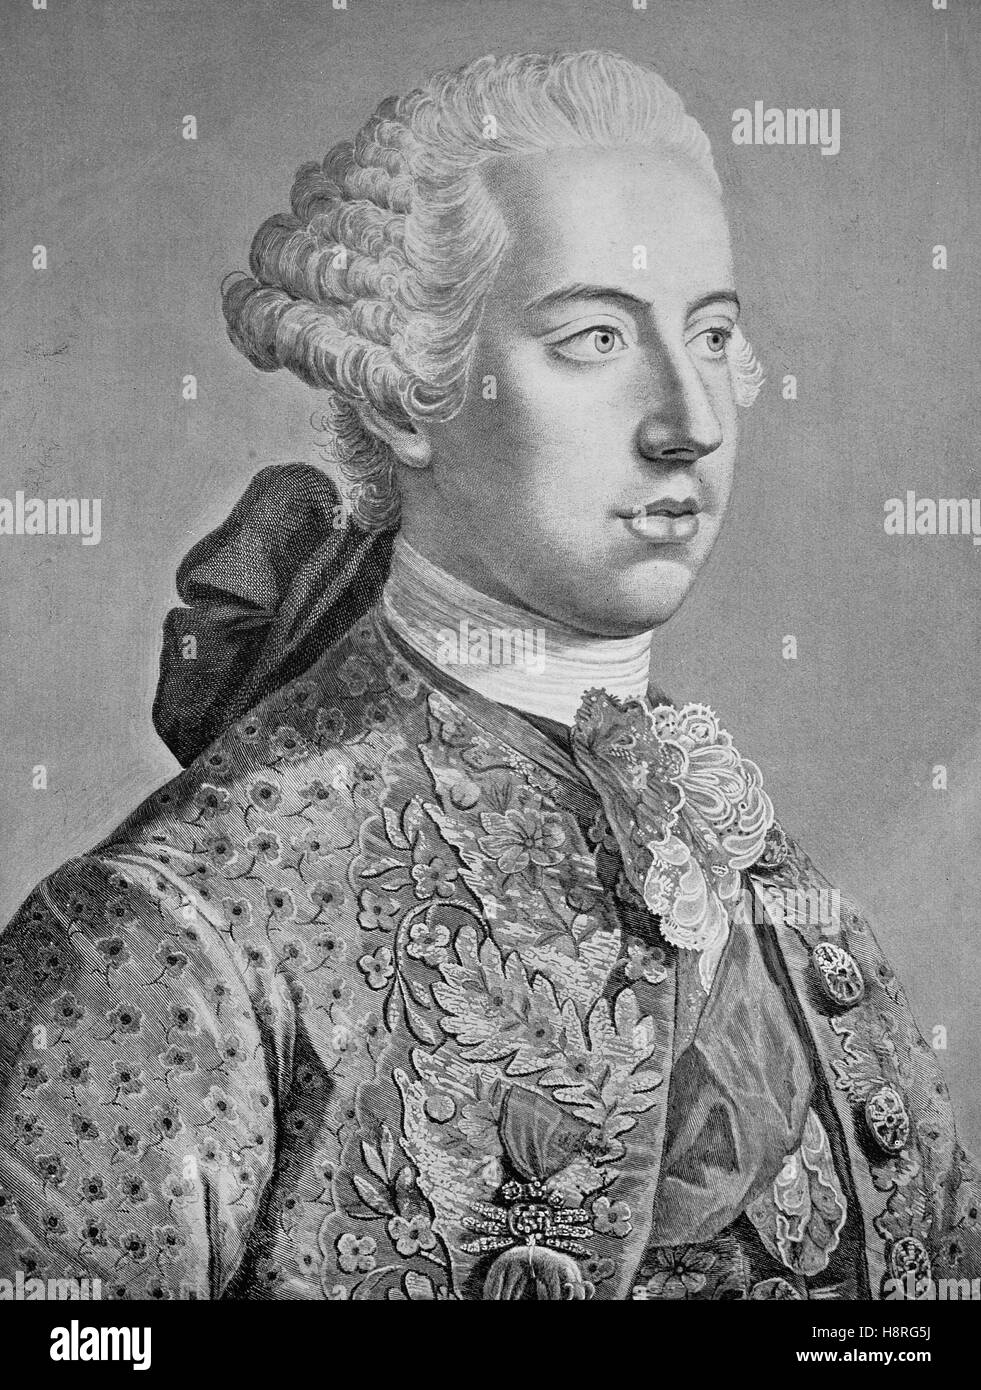 Joseph II., Joseph Benedikt Anton Michael Adam was Holy Roman Emperor from 1765 to 1790 and ruler of the Habsburg lands from 1780 to 1790 Stock Photo